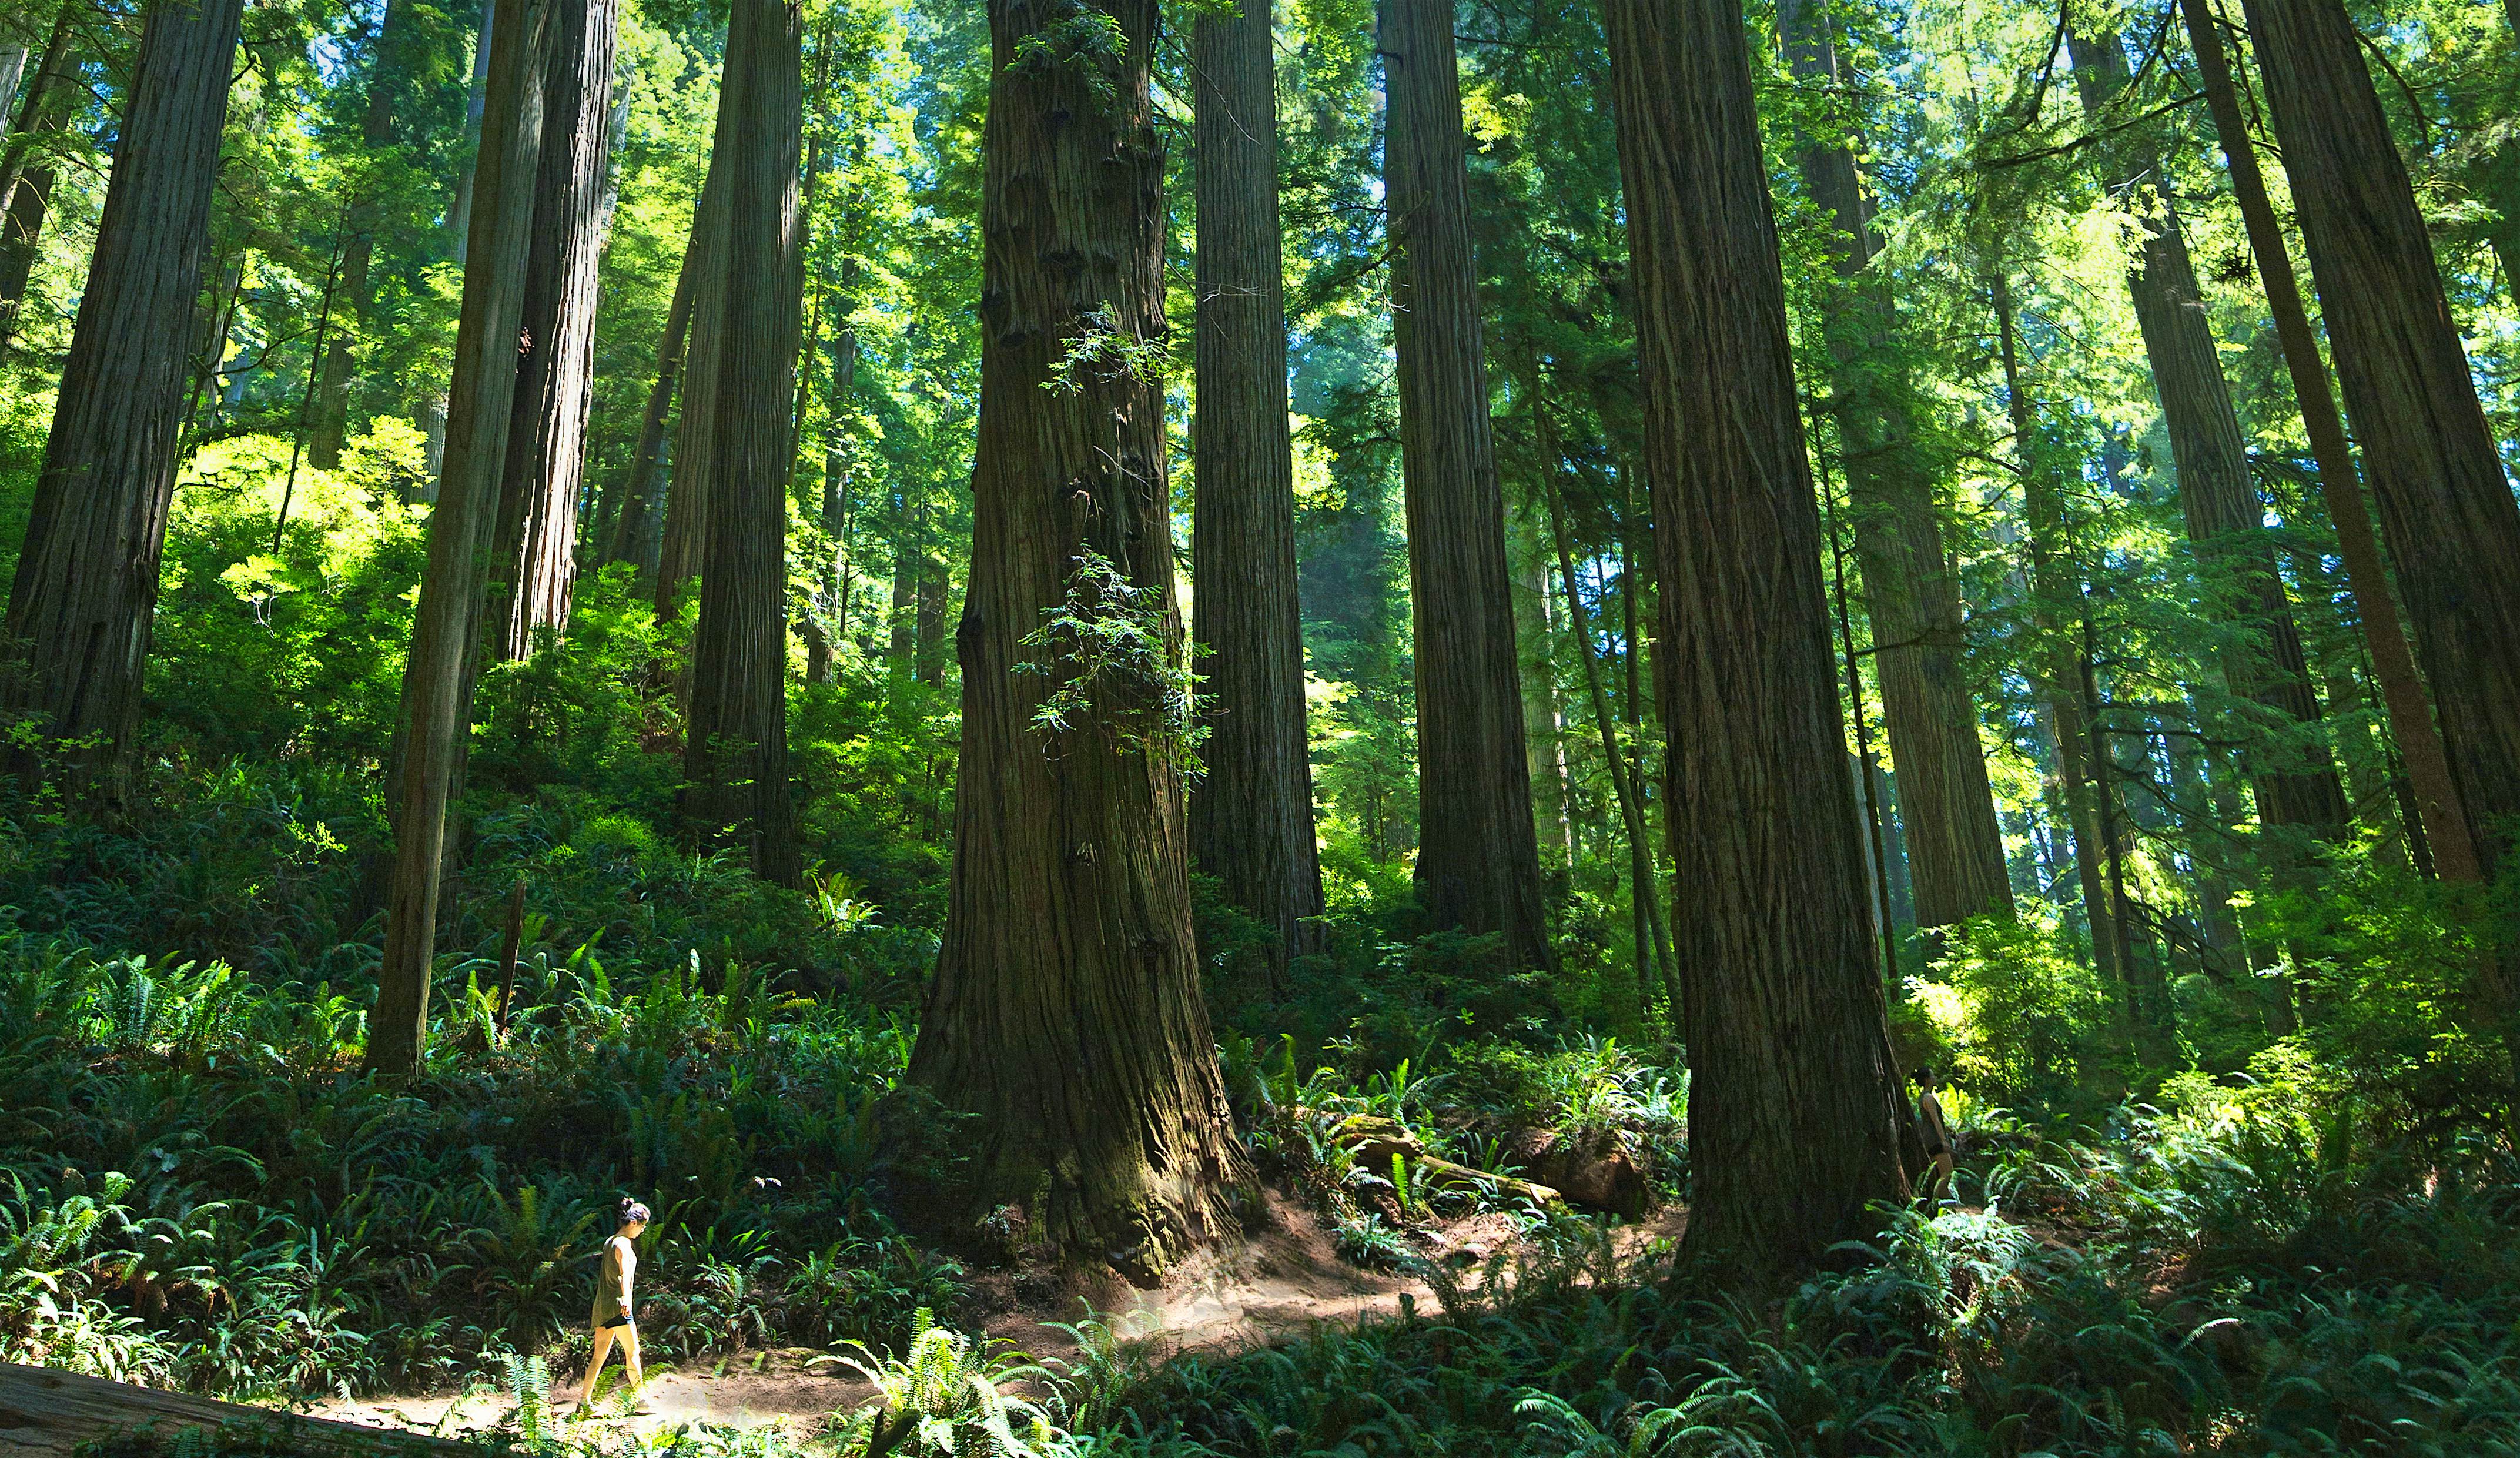 Seeking serenity: forest bathing among California's redwoods - Lonely